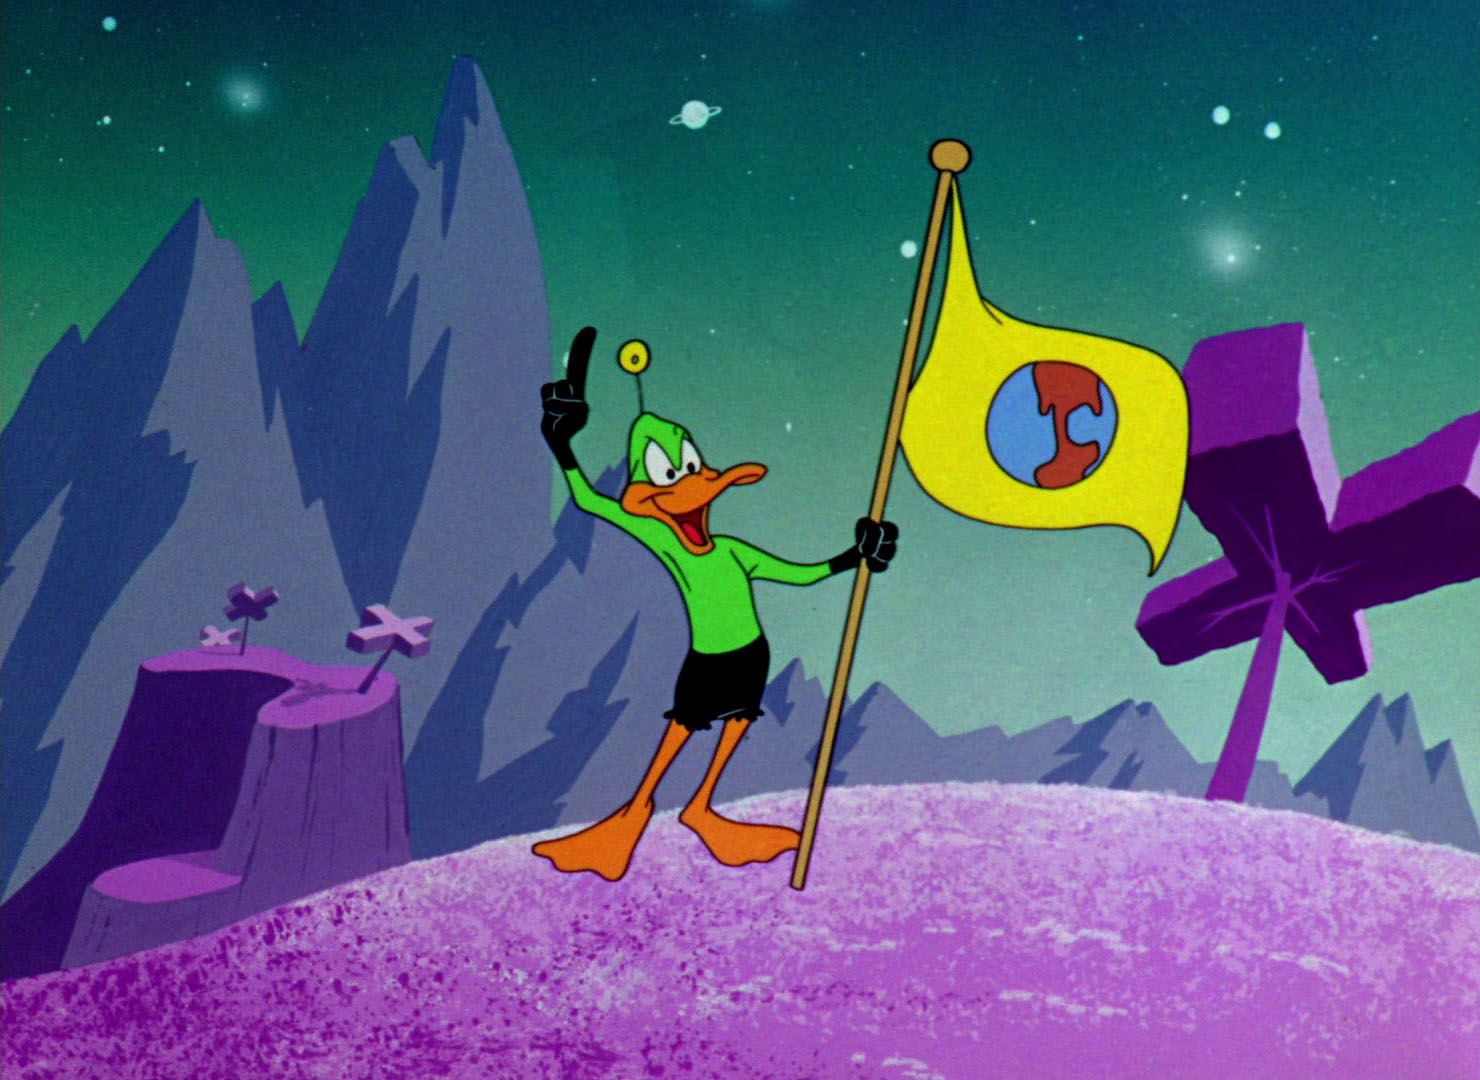 Here Are Some High Definition Screen Captures From The Chuck Jones' Classic Duck Dodgers In The. Looney Tunes Cartoons, Cartoon Crazy, Favorite Cartoon Character